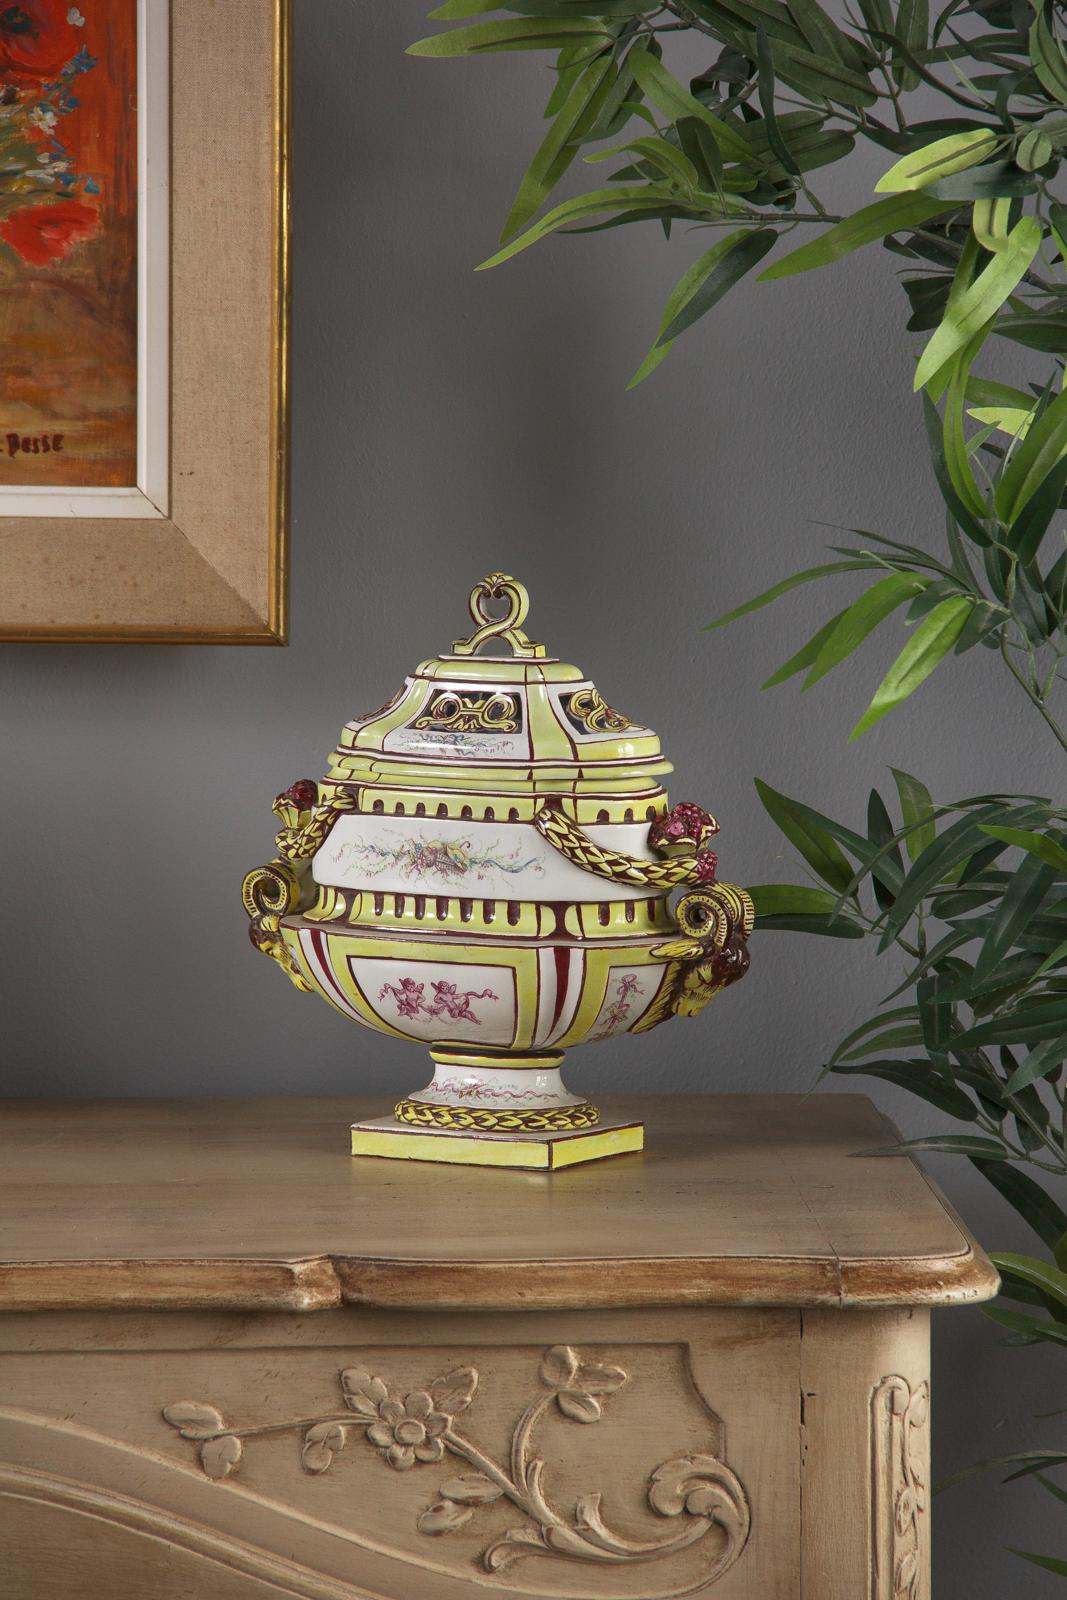 A colorful glazed Vieux Paris ceramic urn from the early 1900s. Wide ceramic form set up on a pedestal and a removable lid with decorated open work for potpourri housing. Scrolling ram's head handles on either side glazed in yellow with burgundy